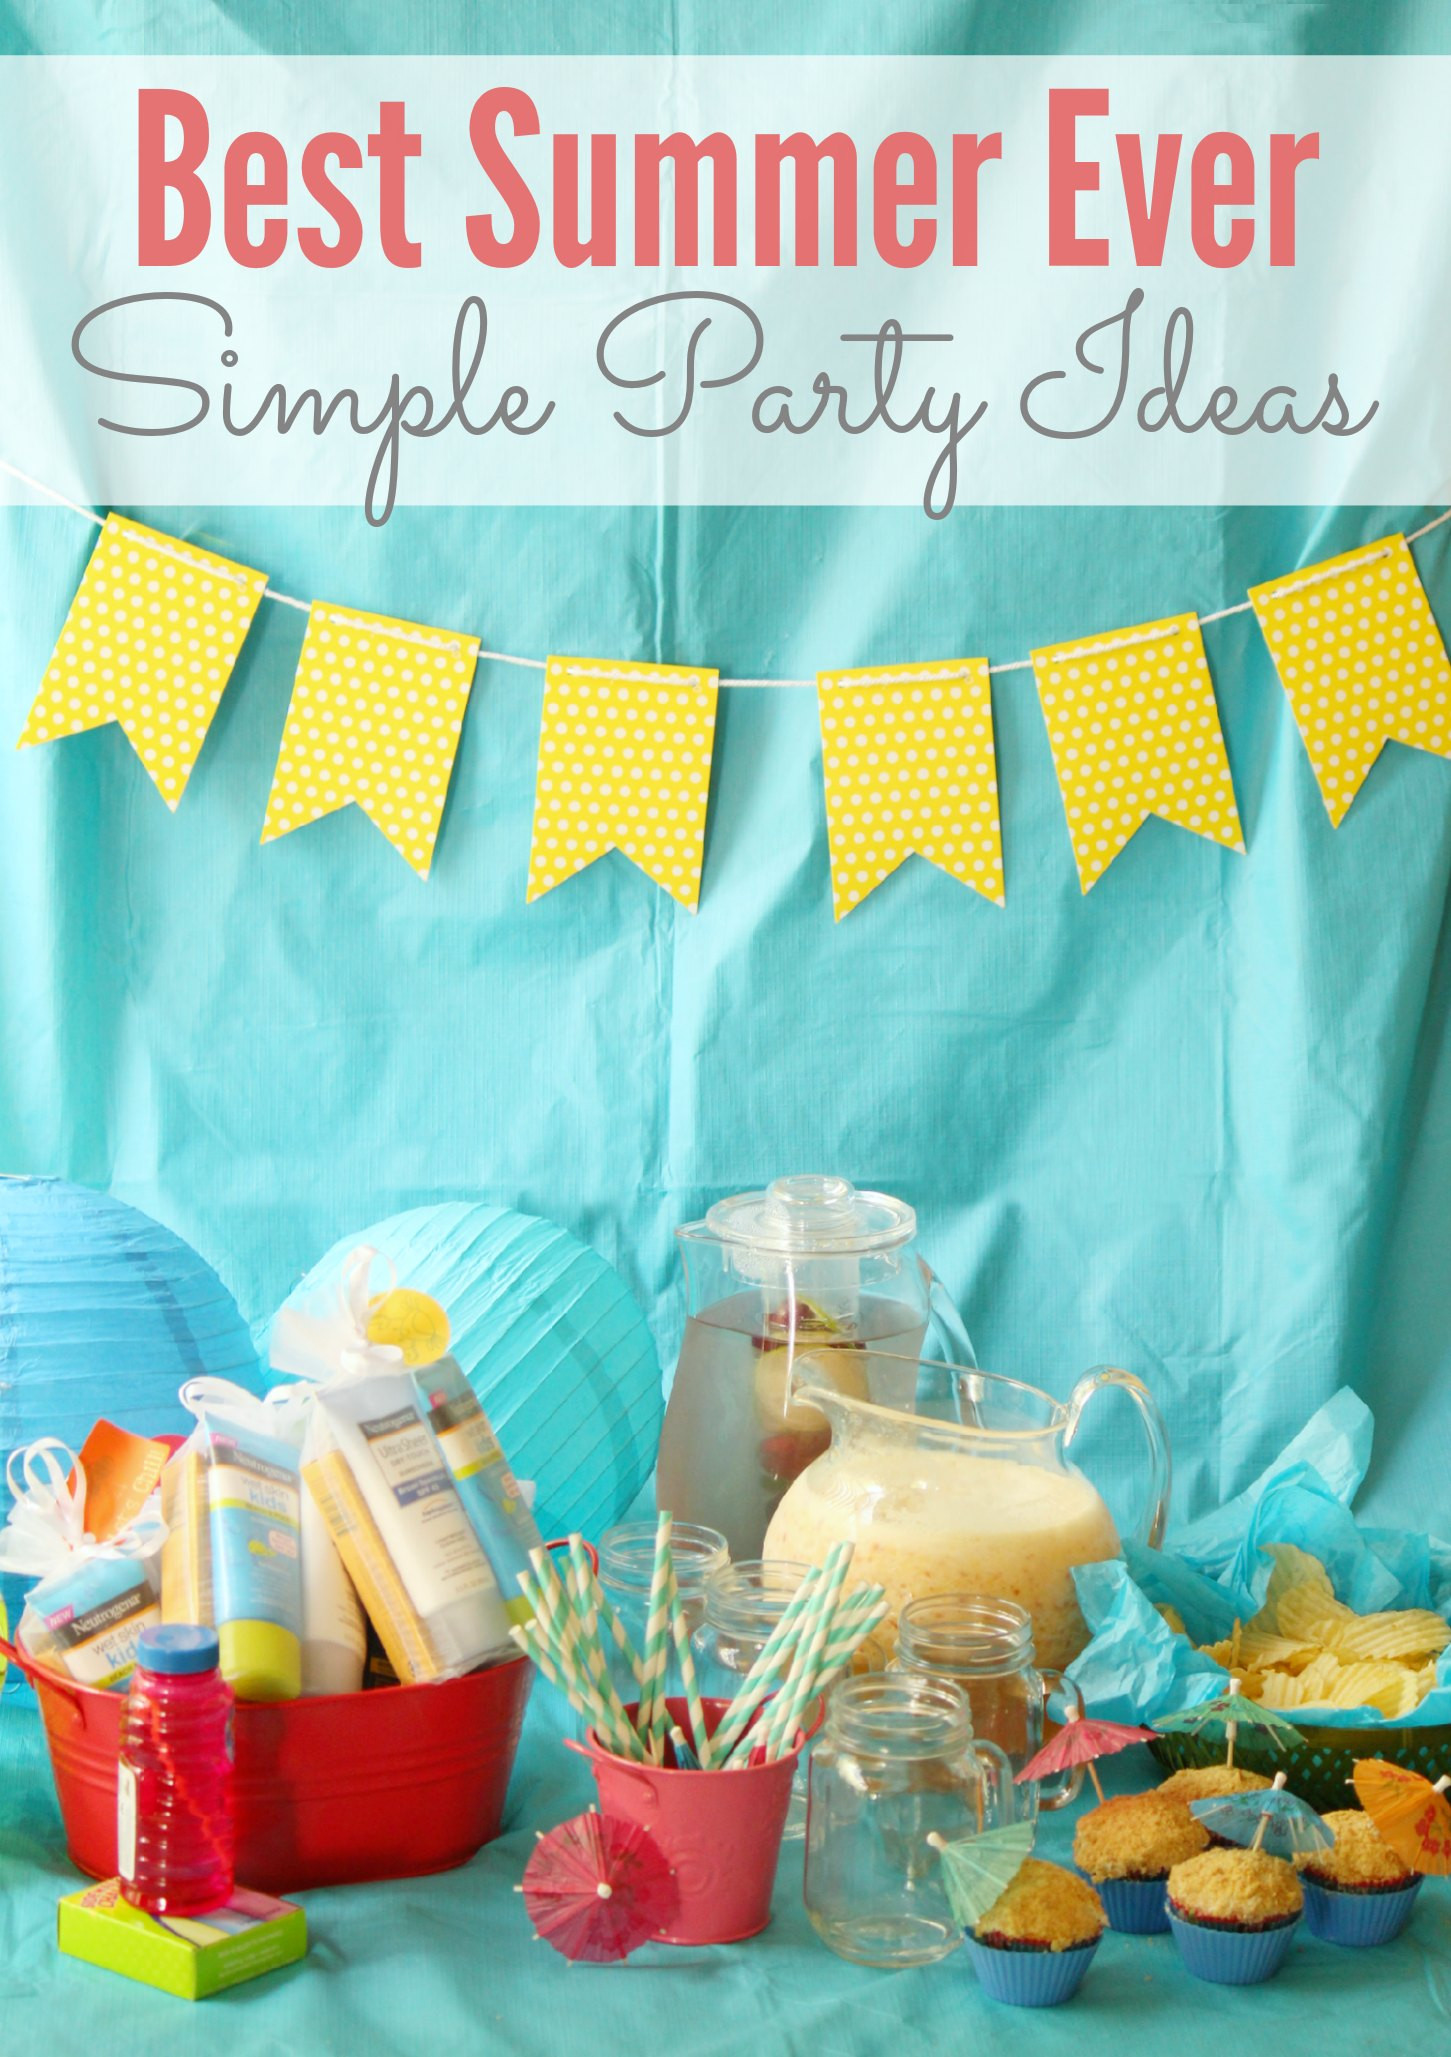 Good Summer Party Ideas
 Simple “Best Summer Ever” Party Ideas